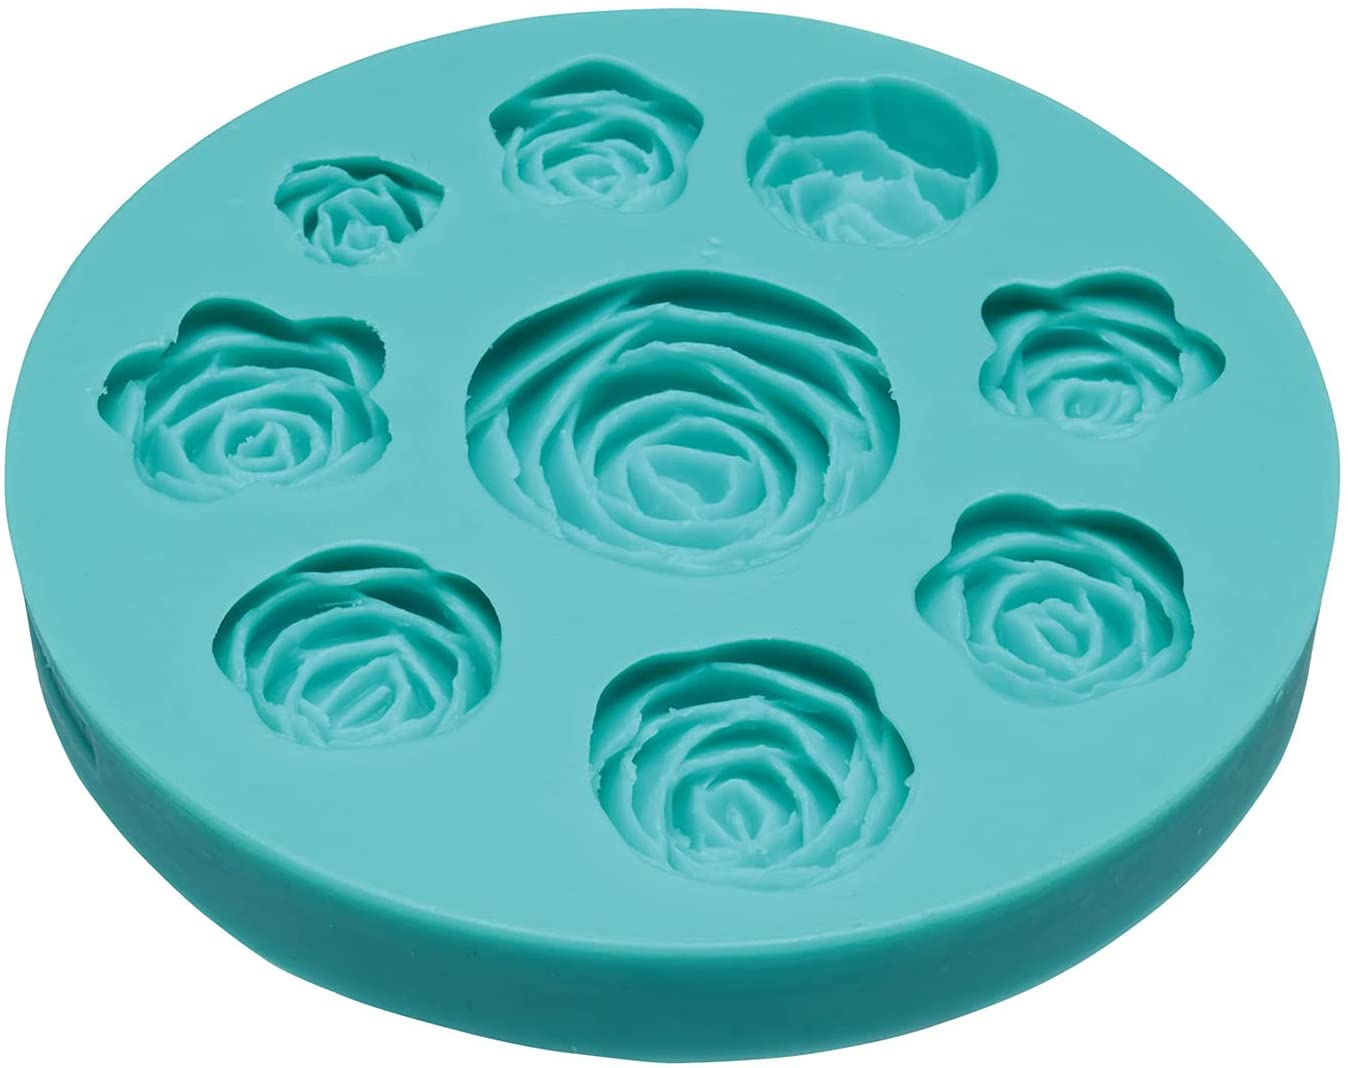 KitchenCraft Sweetly Does It Rose Silicone Fondant Mould